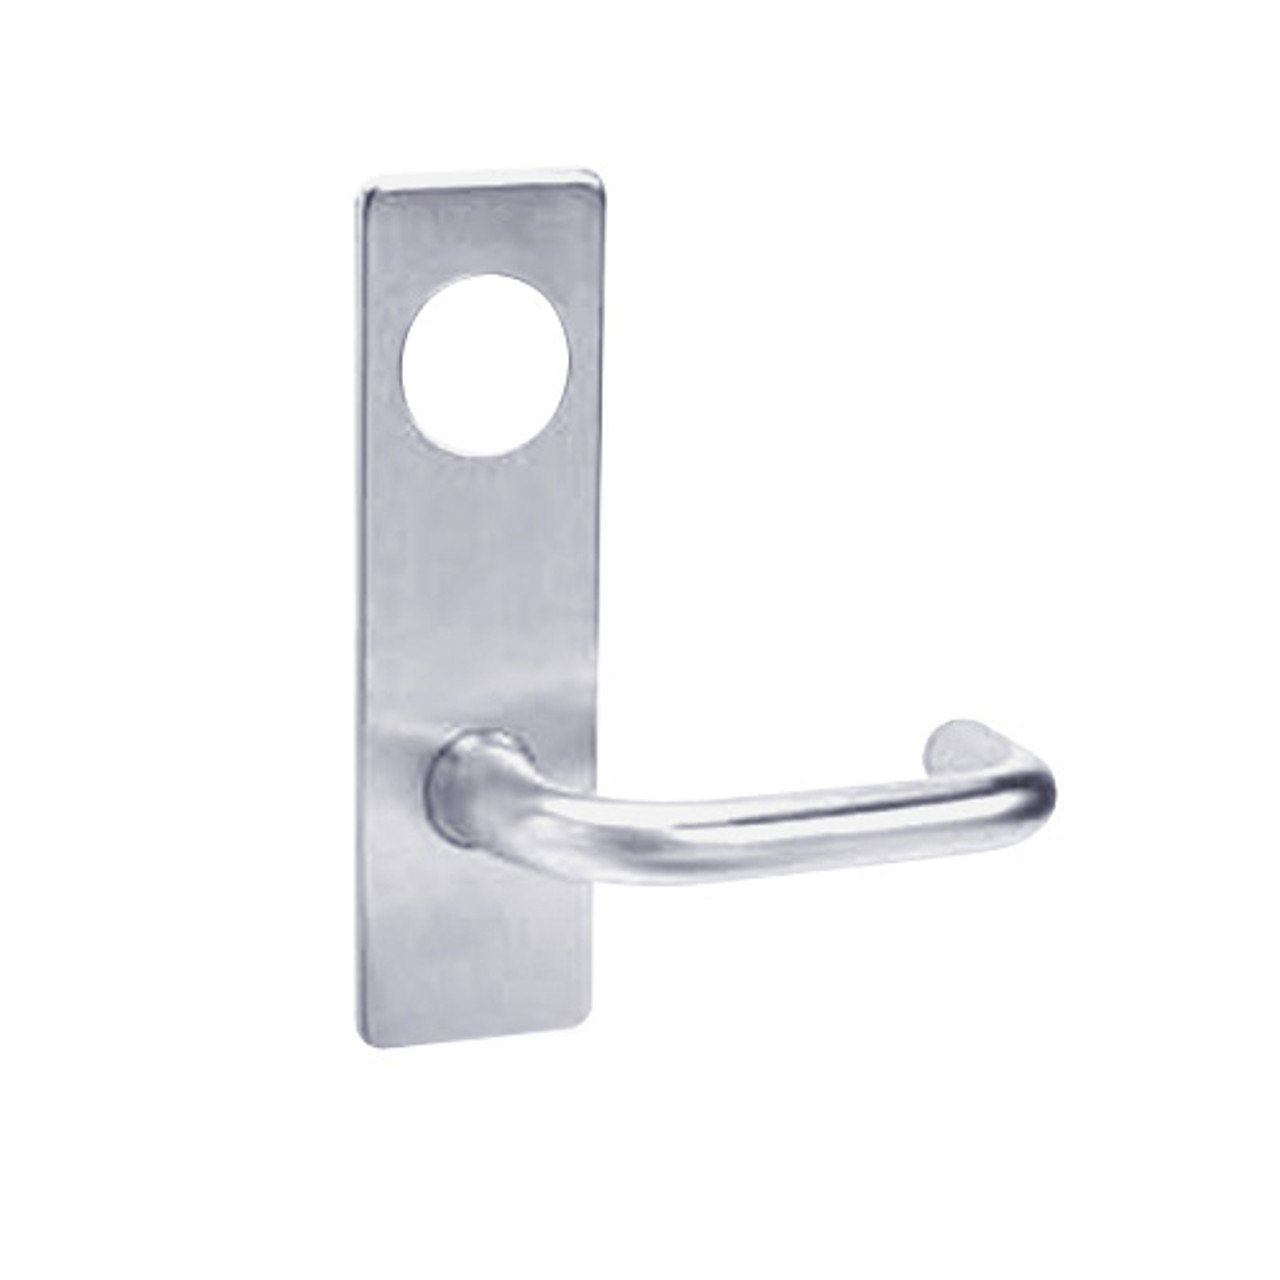 ML2054-LWM-626-CL7 Corbin Russwin ML2000 Series IC 7-Pin Less Core Mortise Entrance Locksets with Lustra Lever in Satin Chrome